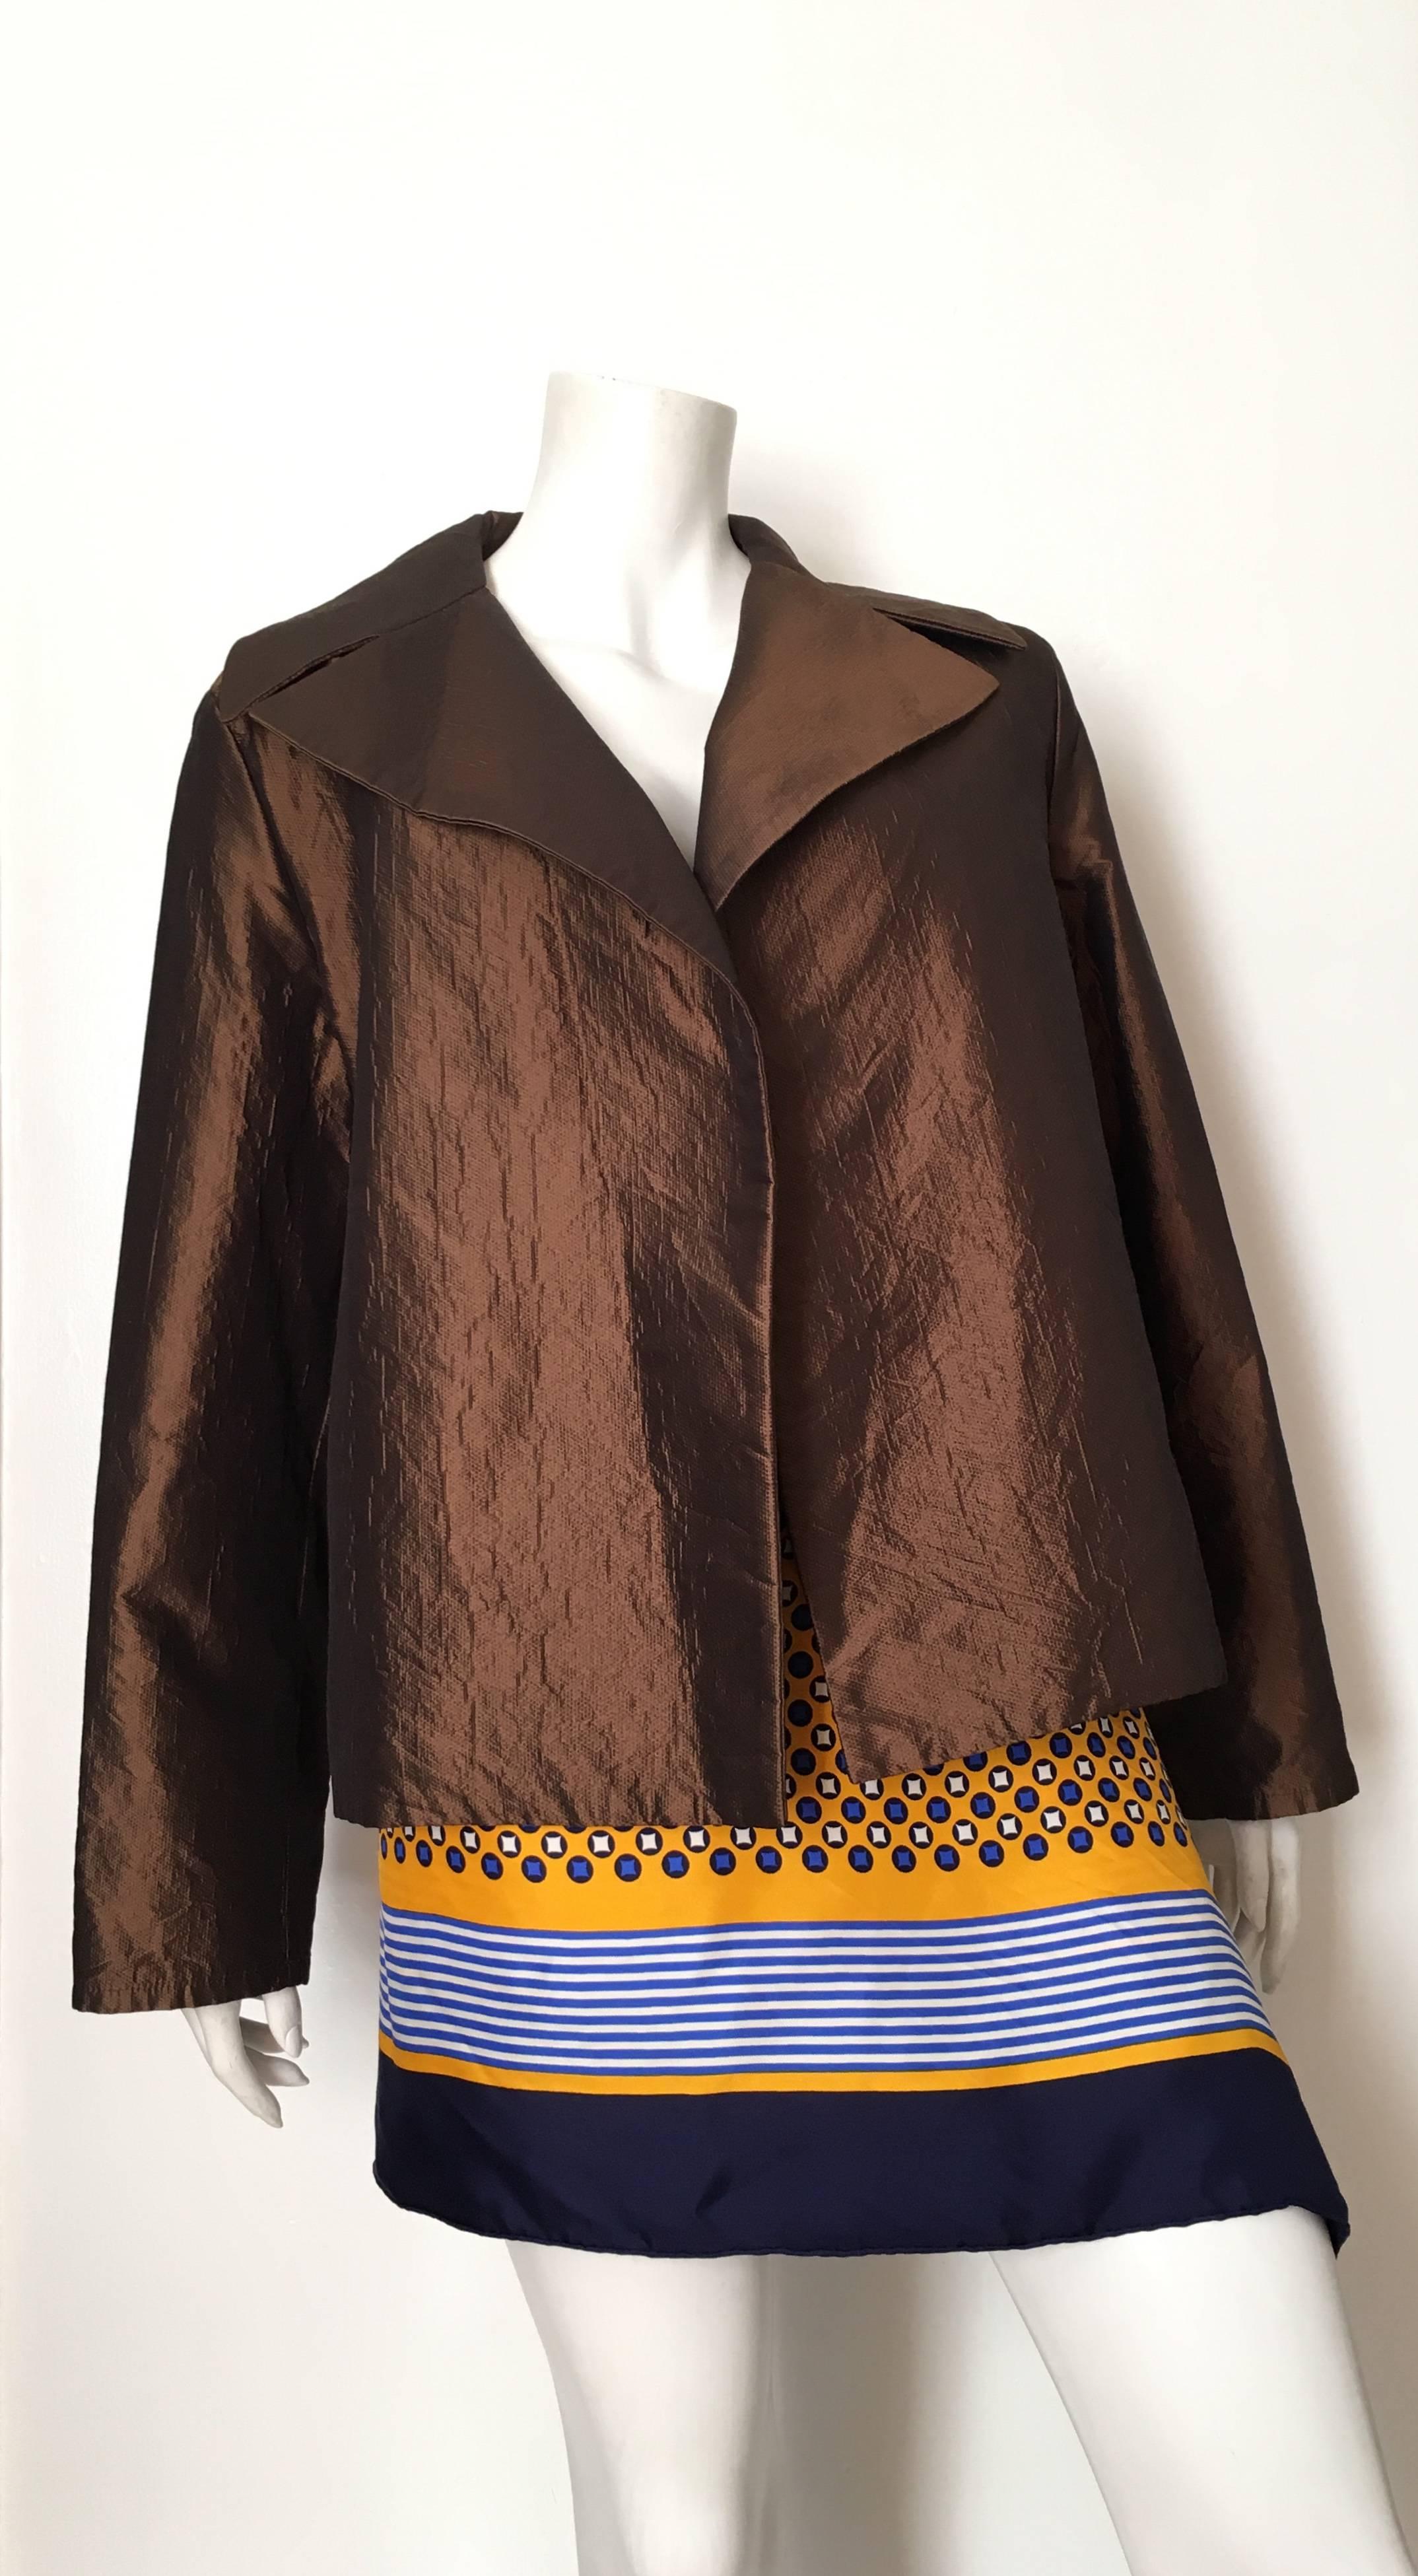 Dusan bronze silk & cashmere blend jacket is a size x-large. Belted or worn open this bronze jacket is stunning.  The retail price of this jacket was $2,000 when it was purchased and it's in excellent pristine condition. 
Measurements are:
49